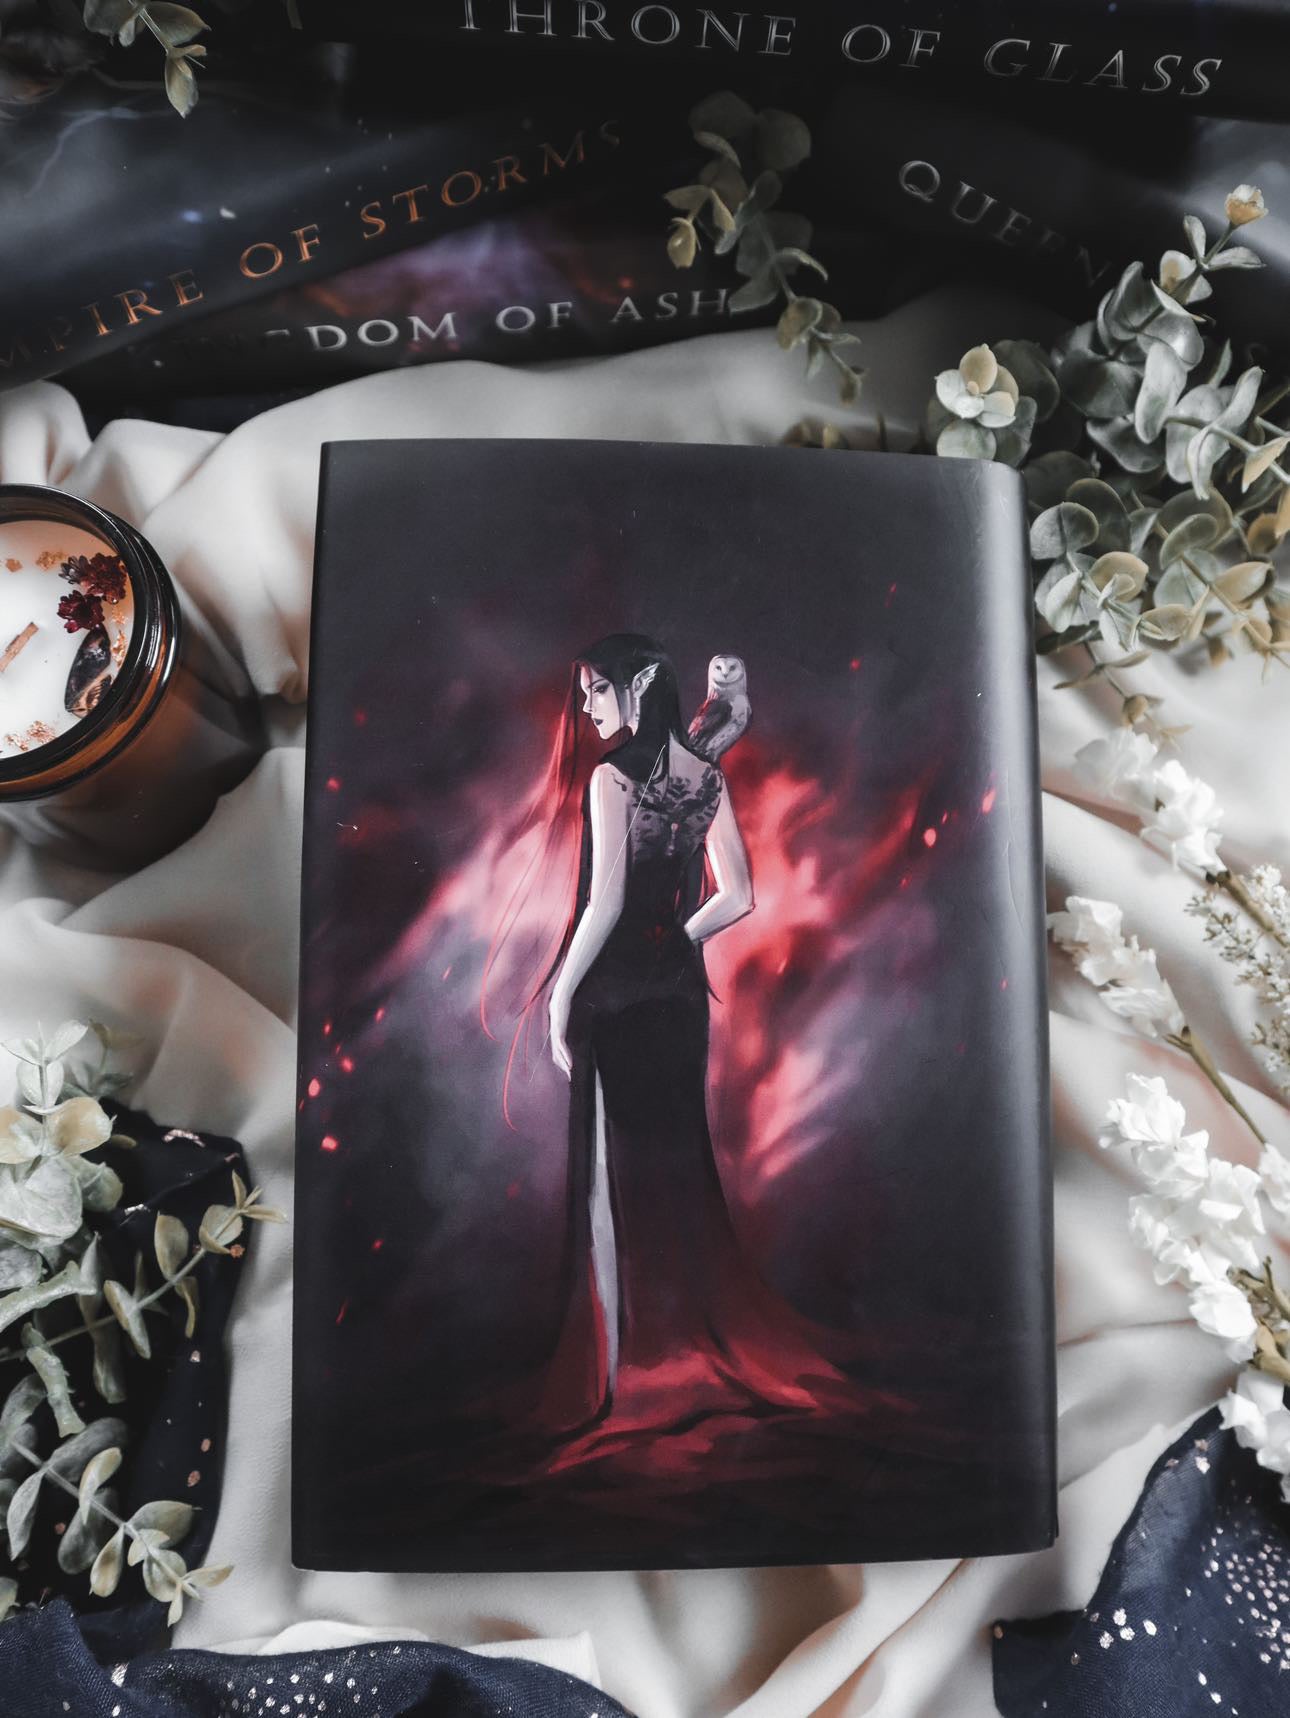 Throne of Glass Dust Jacket Set